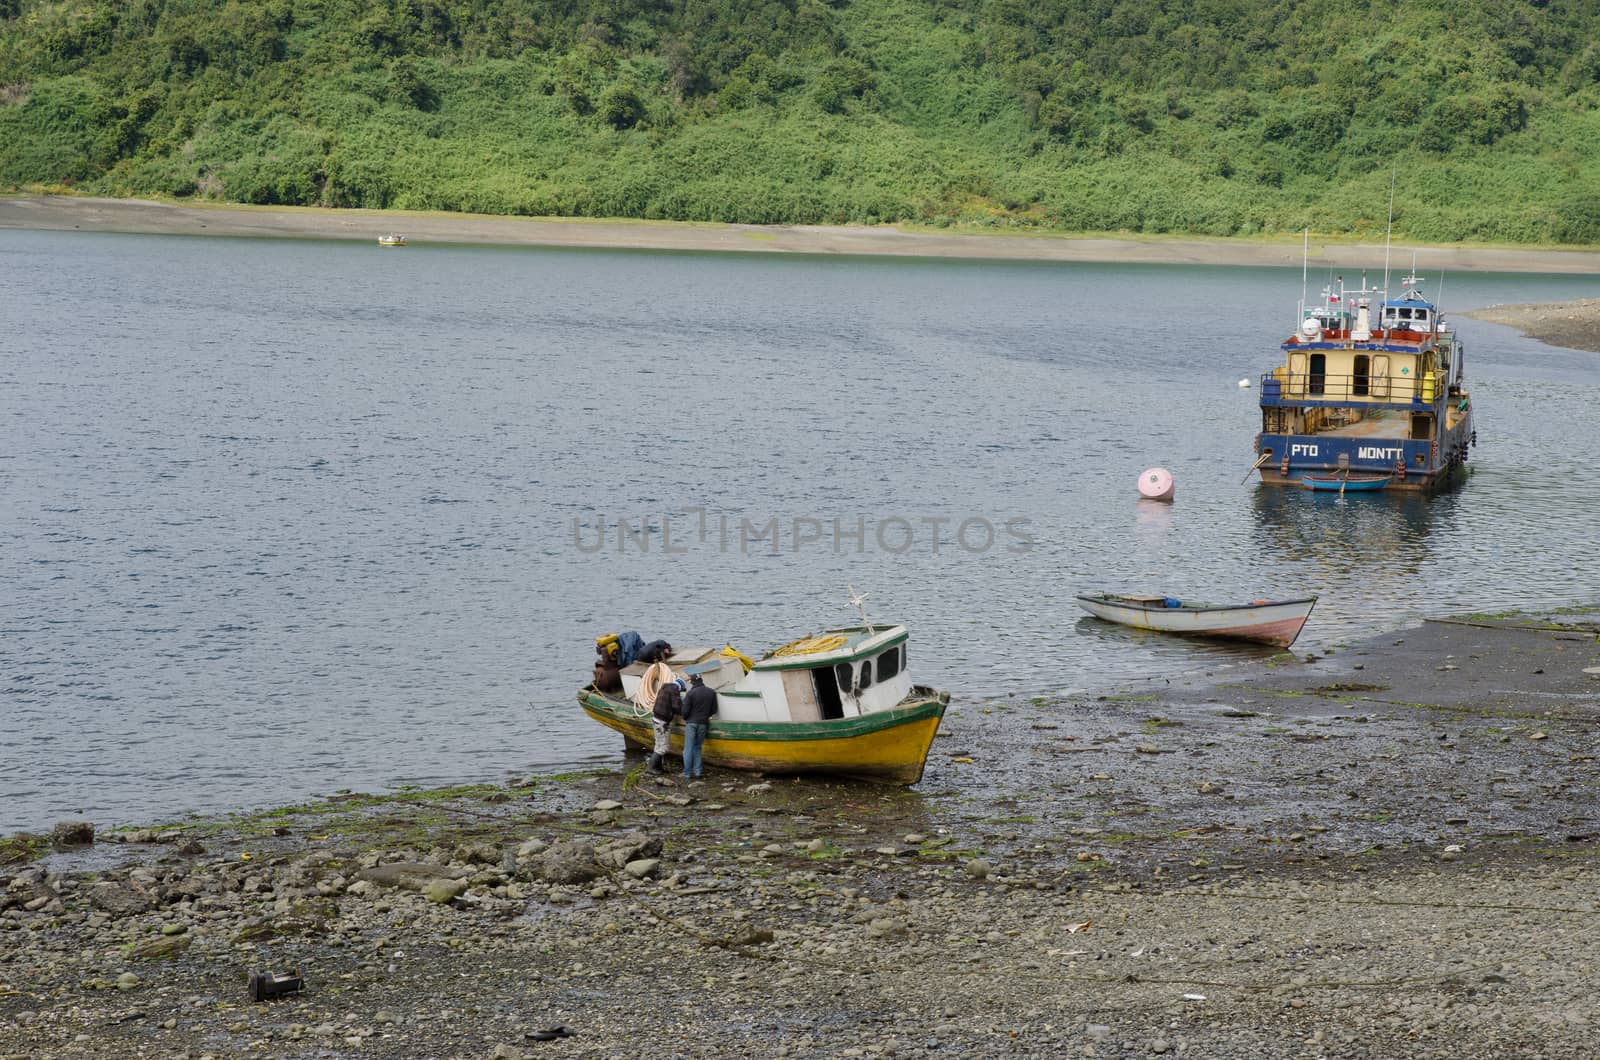 Boats in the Angelmo district of Puerto Montt. by VictorSuarez